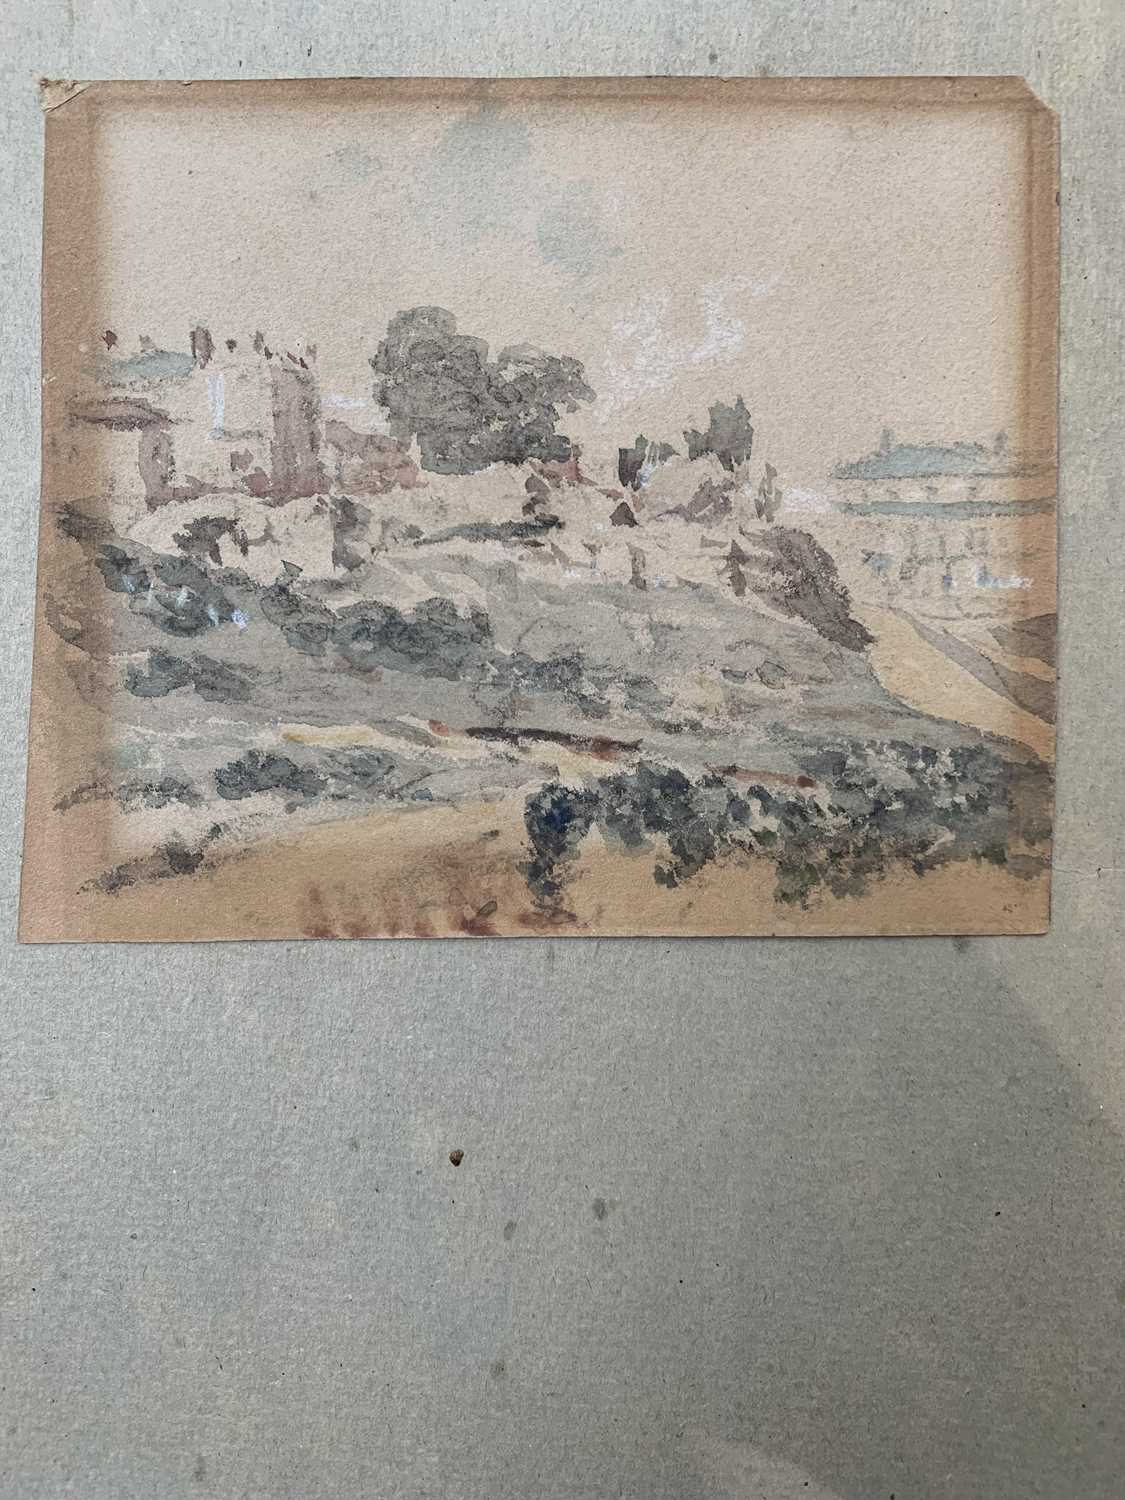 Attributed to Agostino AGLIO (1777-1857) but previously attributed to J.M.W. Turner Tunbridge - Image 5 of 7